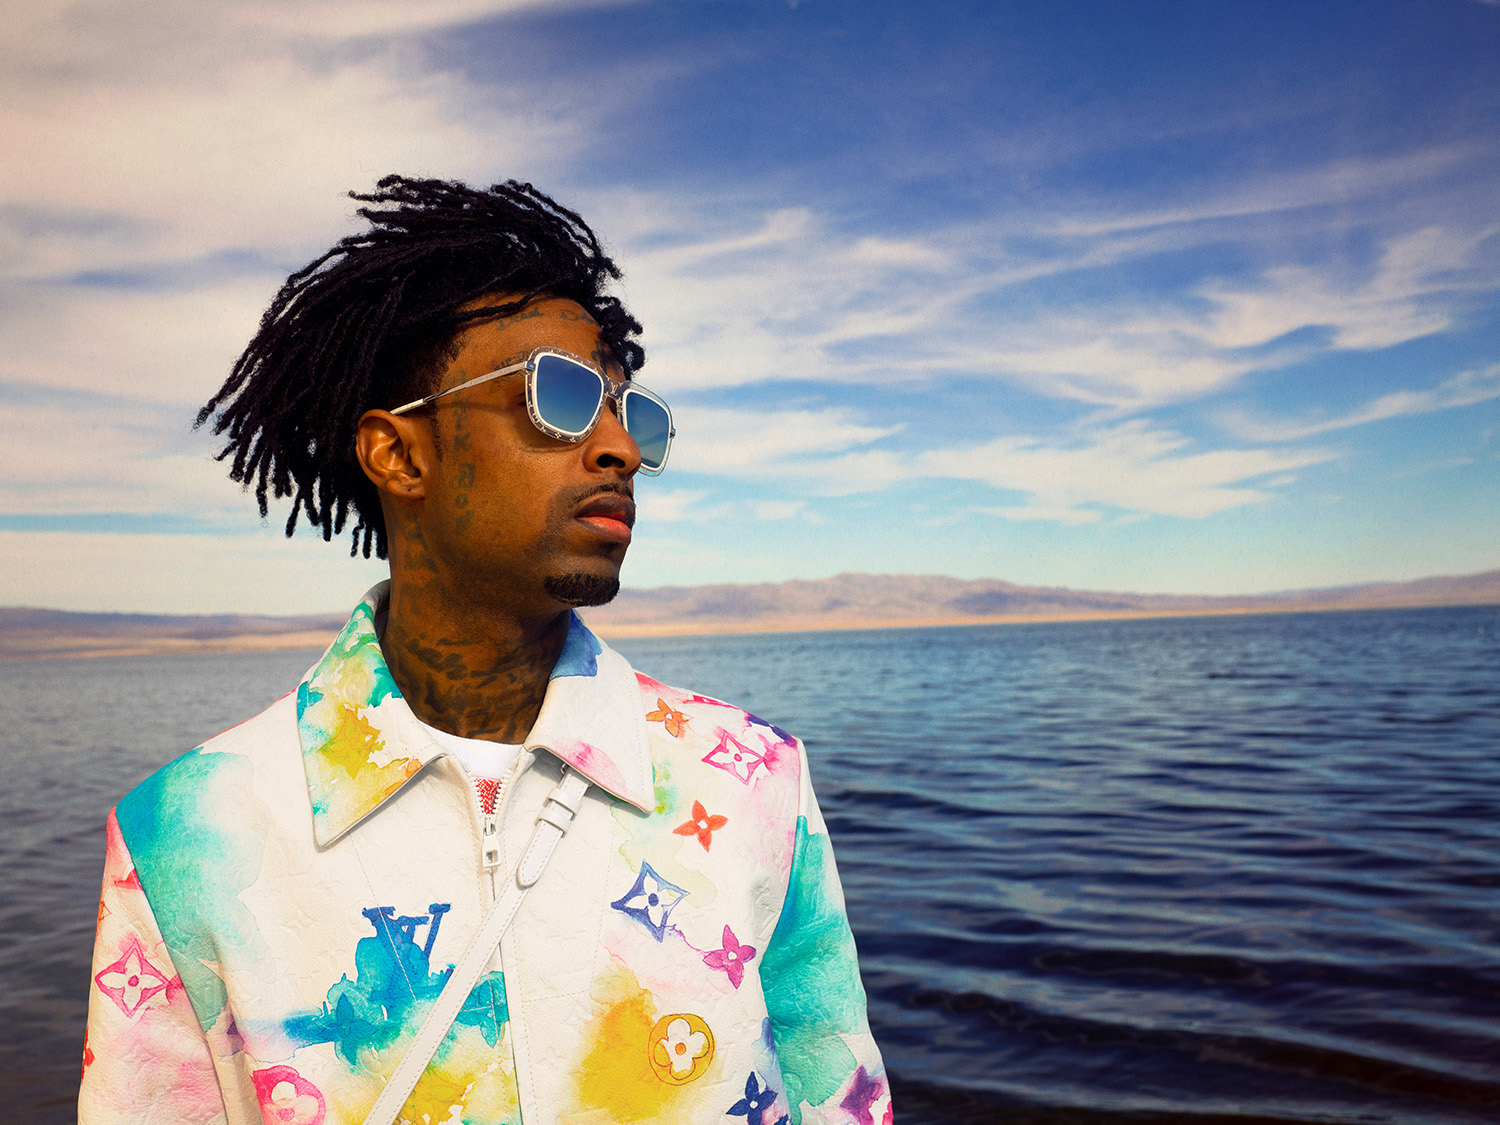 LOUIS VUITTON 2021 SUMMER COLLECTION FEAT. 21 SAVAGE | SWAG HOMMES